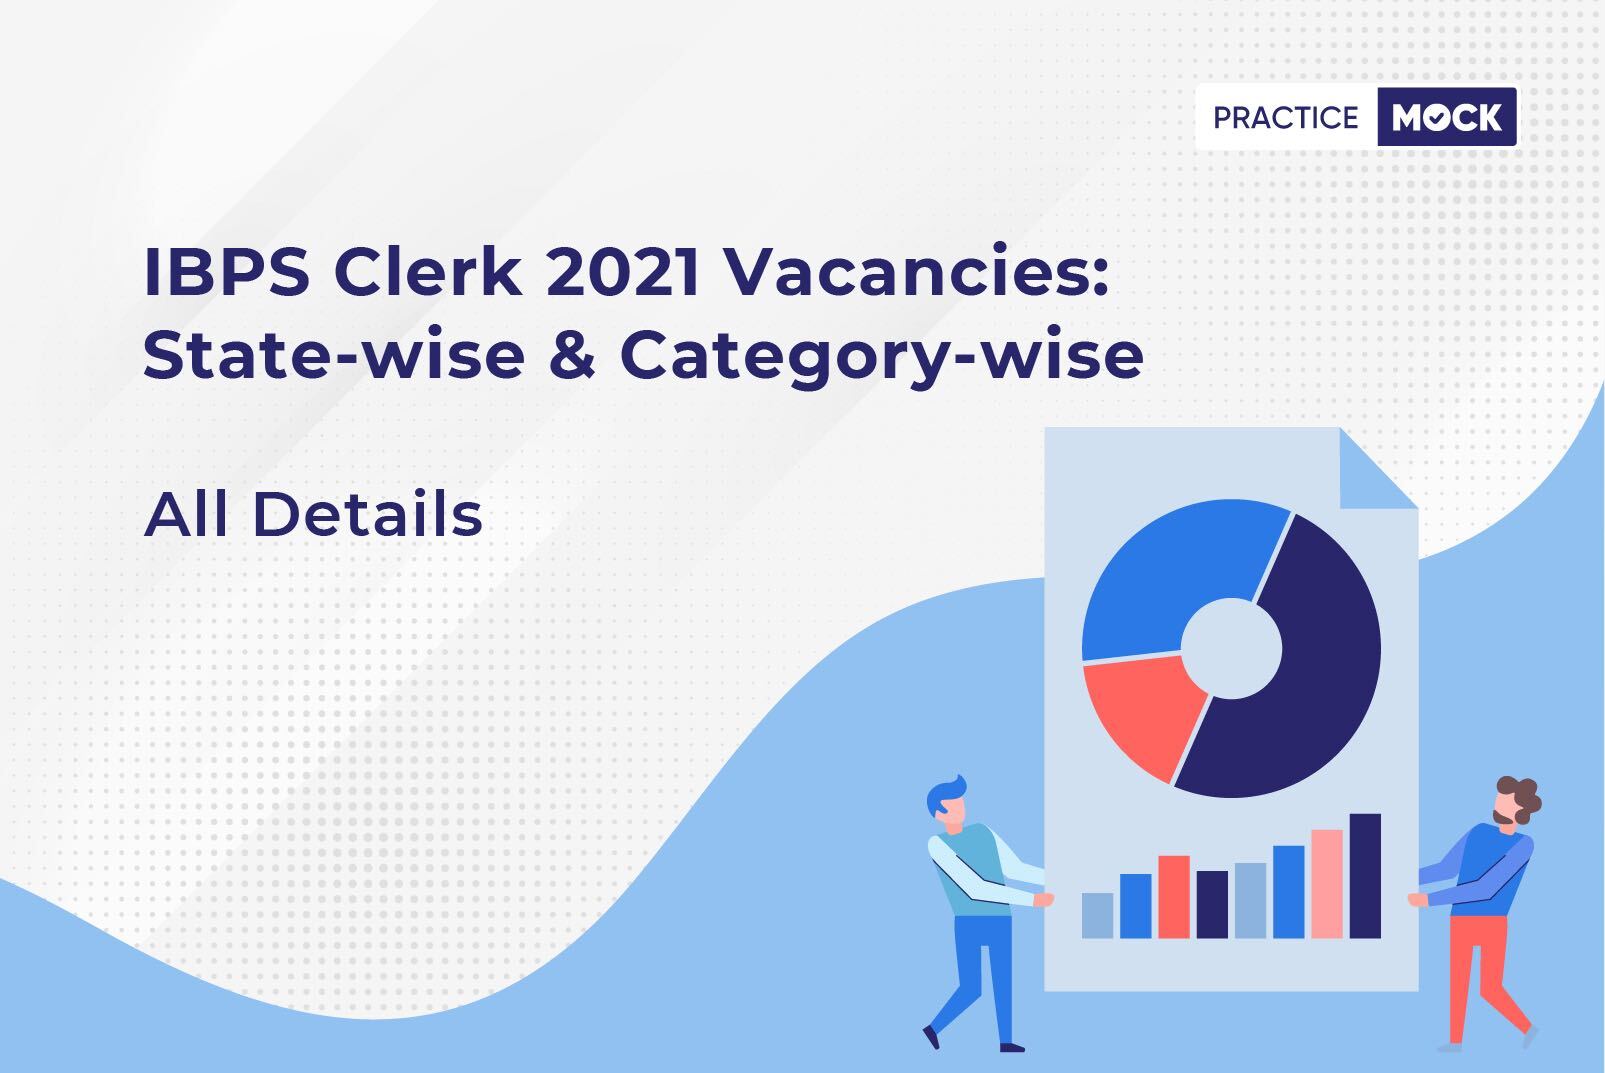 IBPS Clerk 2021 Vacancies - State-wise Category-wise - All details